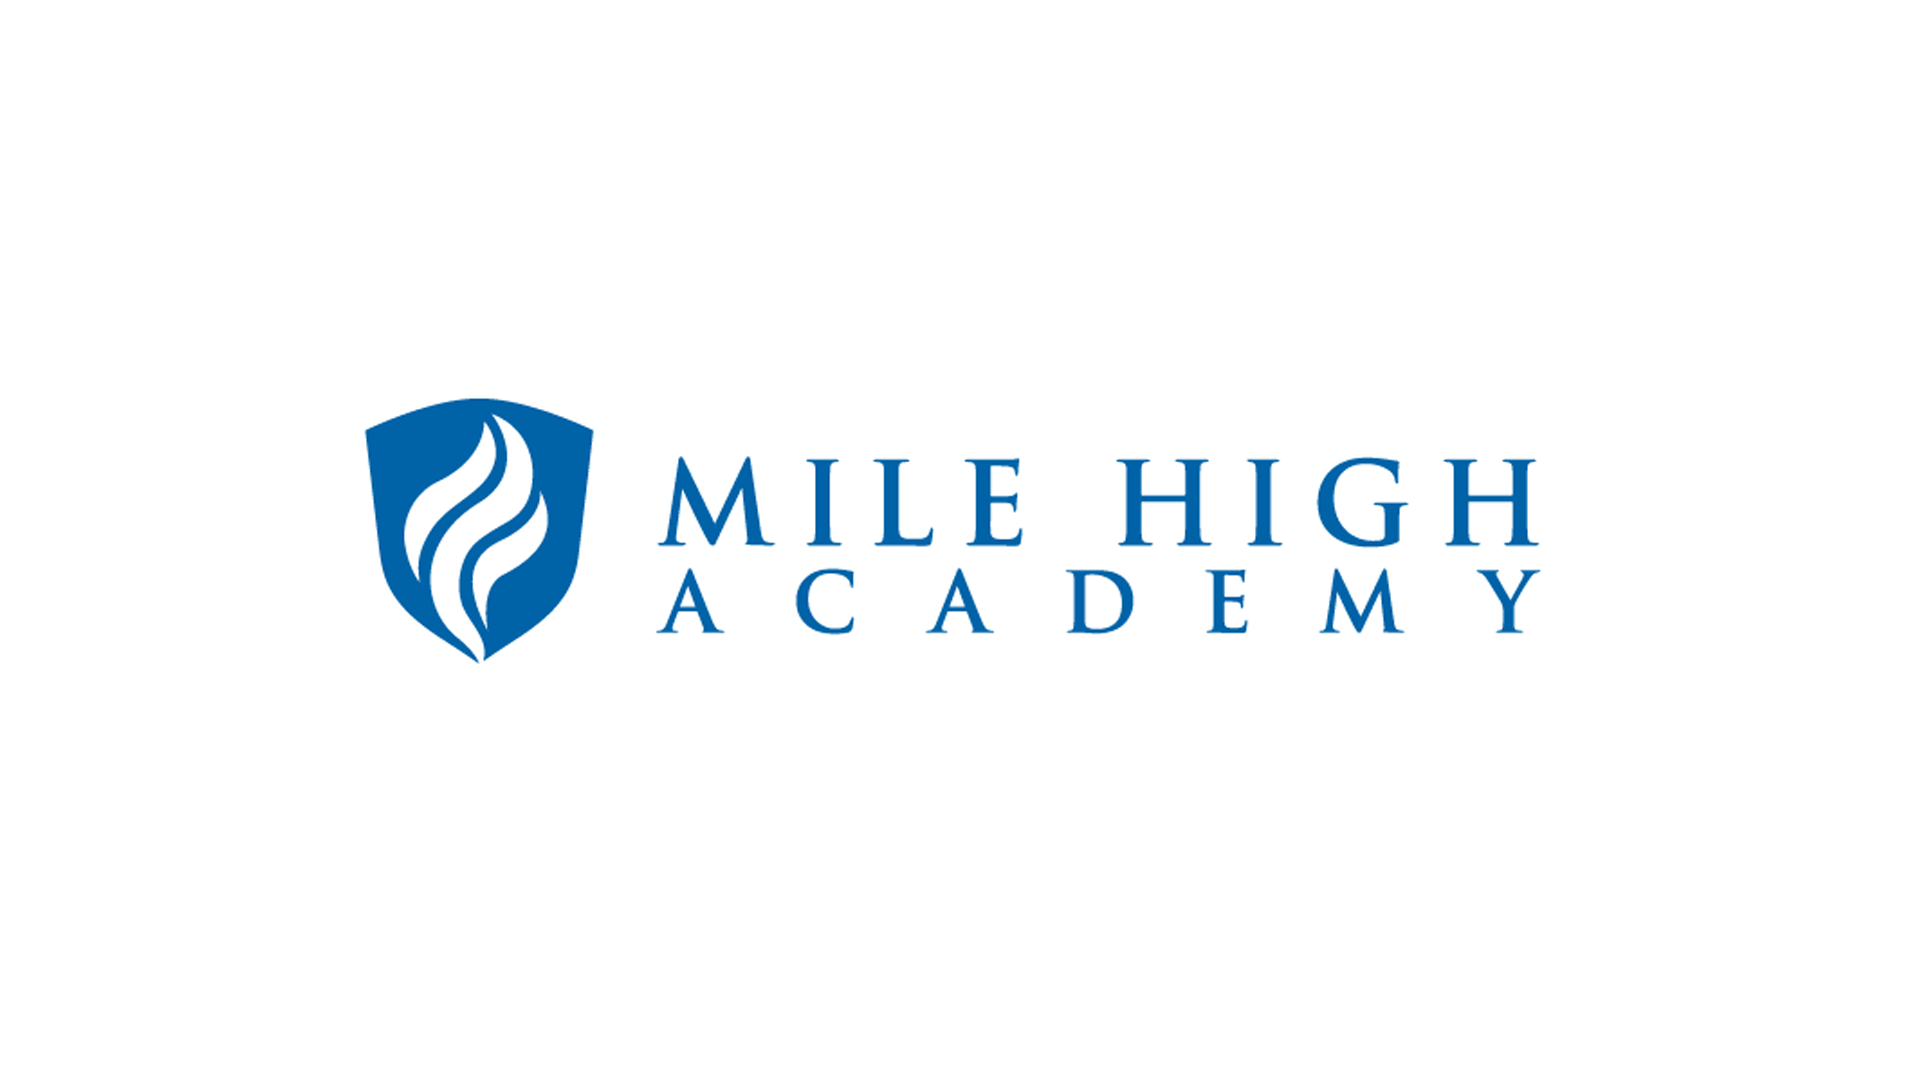 NEW SCHOOL BRANDING UNVEILED AT MILE HIGH ACADEMY